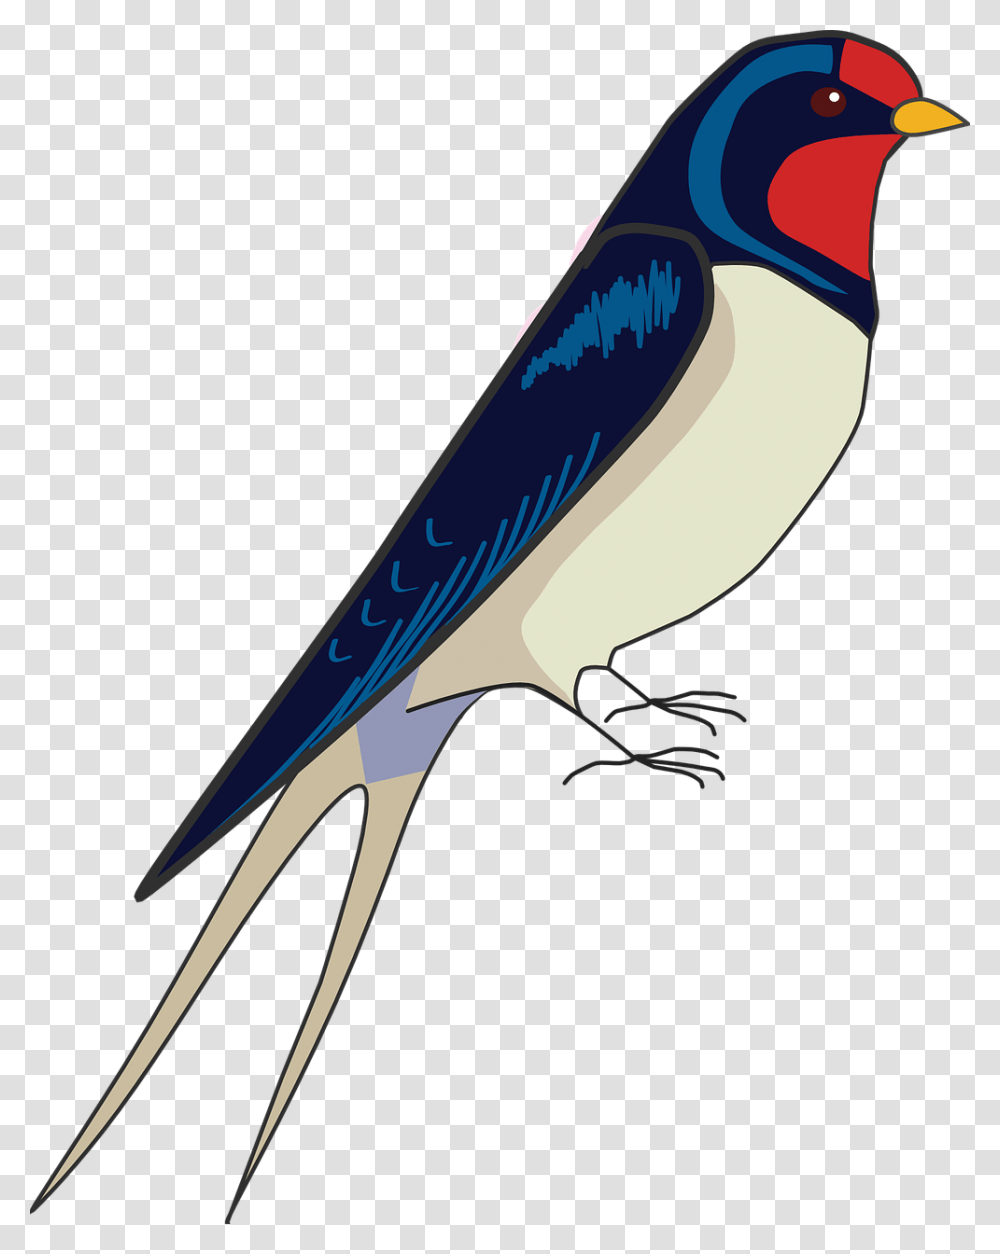 How To Draw A Bird How To Draw A Swallow Draw Easy Swallow Bird, Bluebird, Animal, Jay, Blue Jay Transparent Png